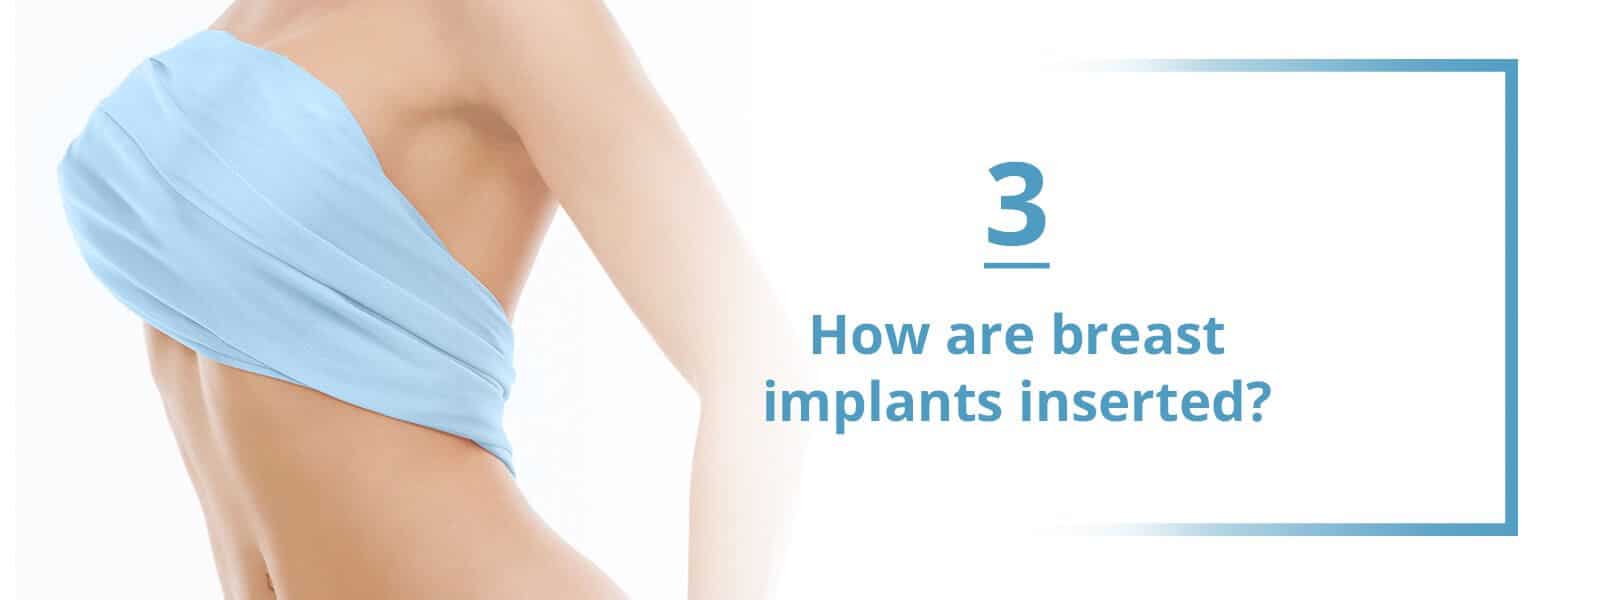 how are breast implants inserted?